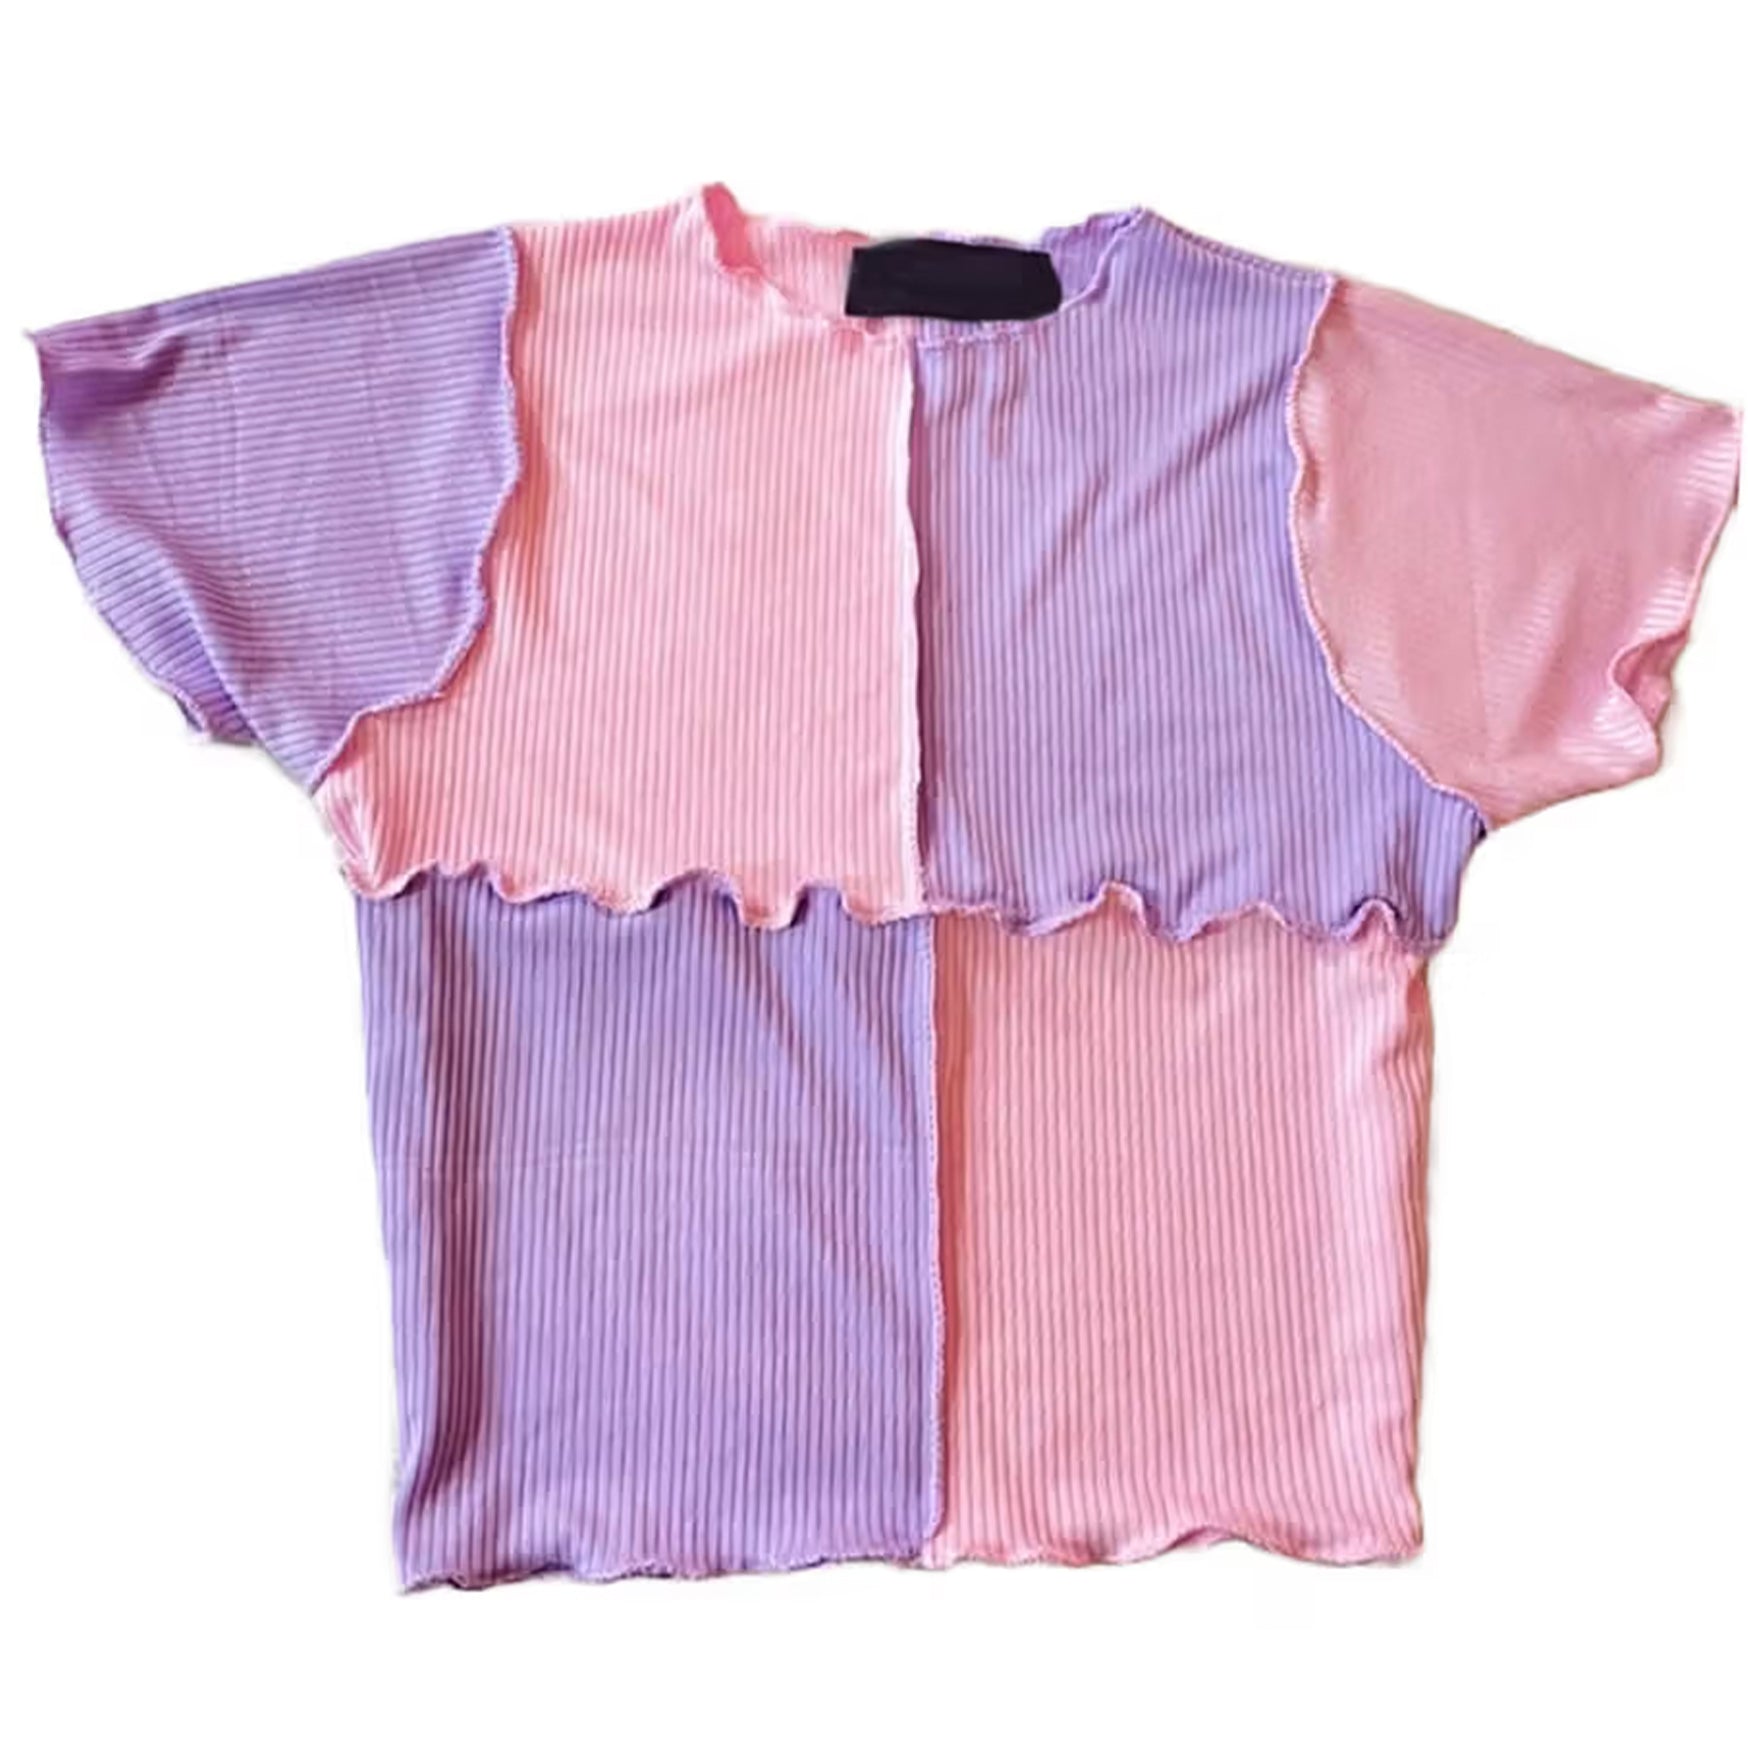 Khhalisi Pink Crop Top for Womens (S)